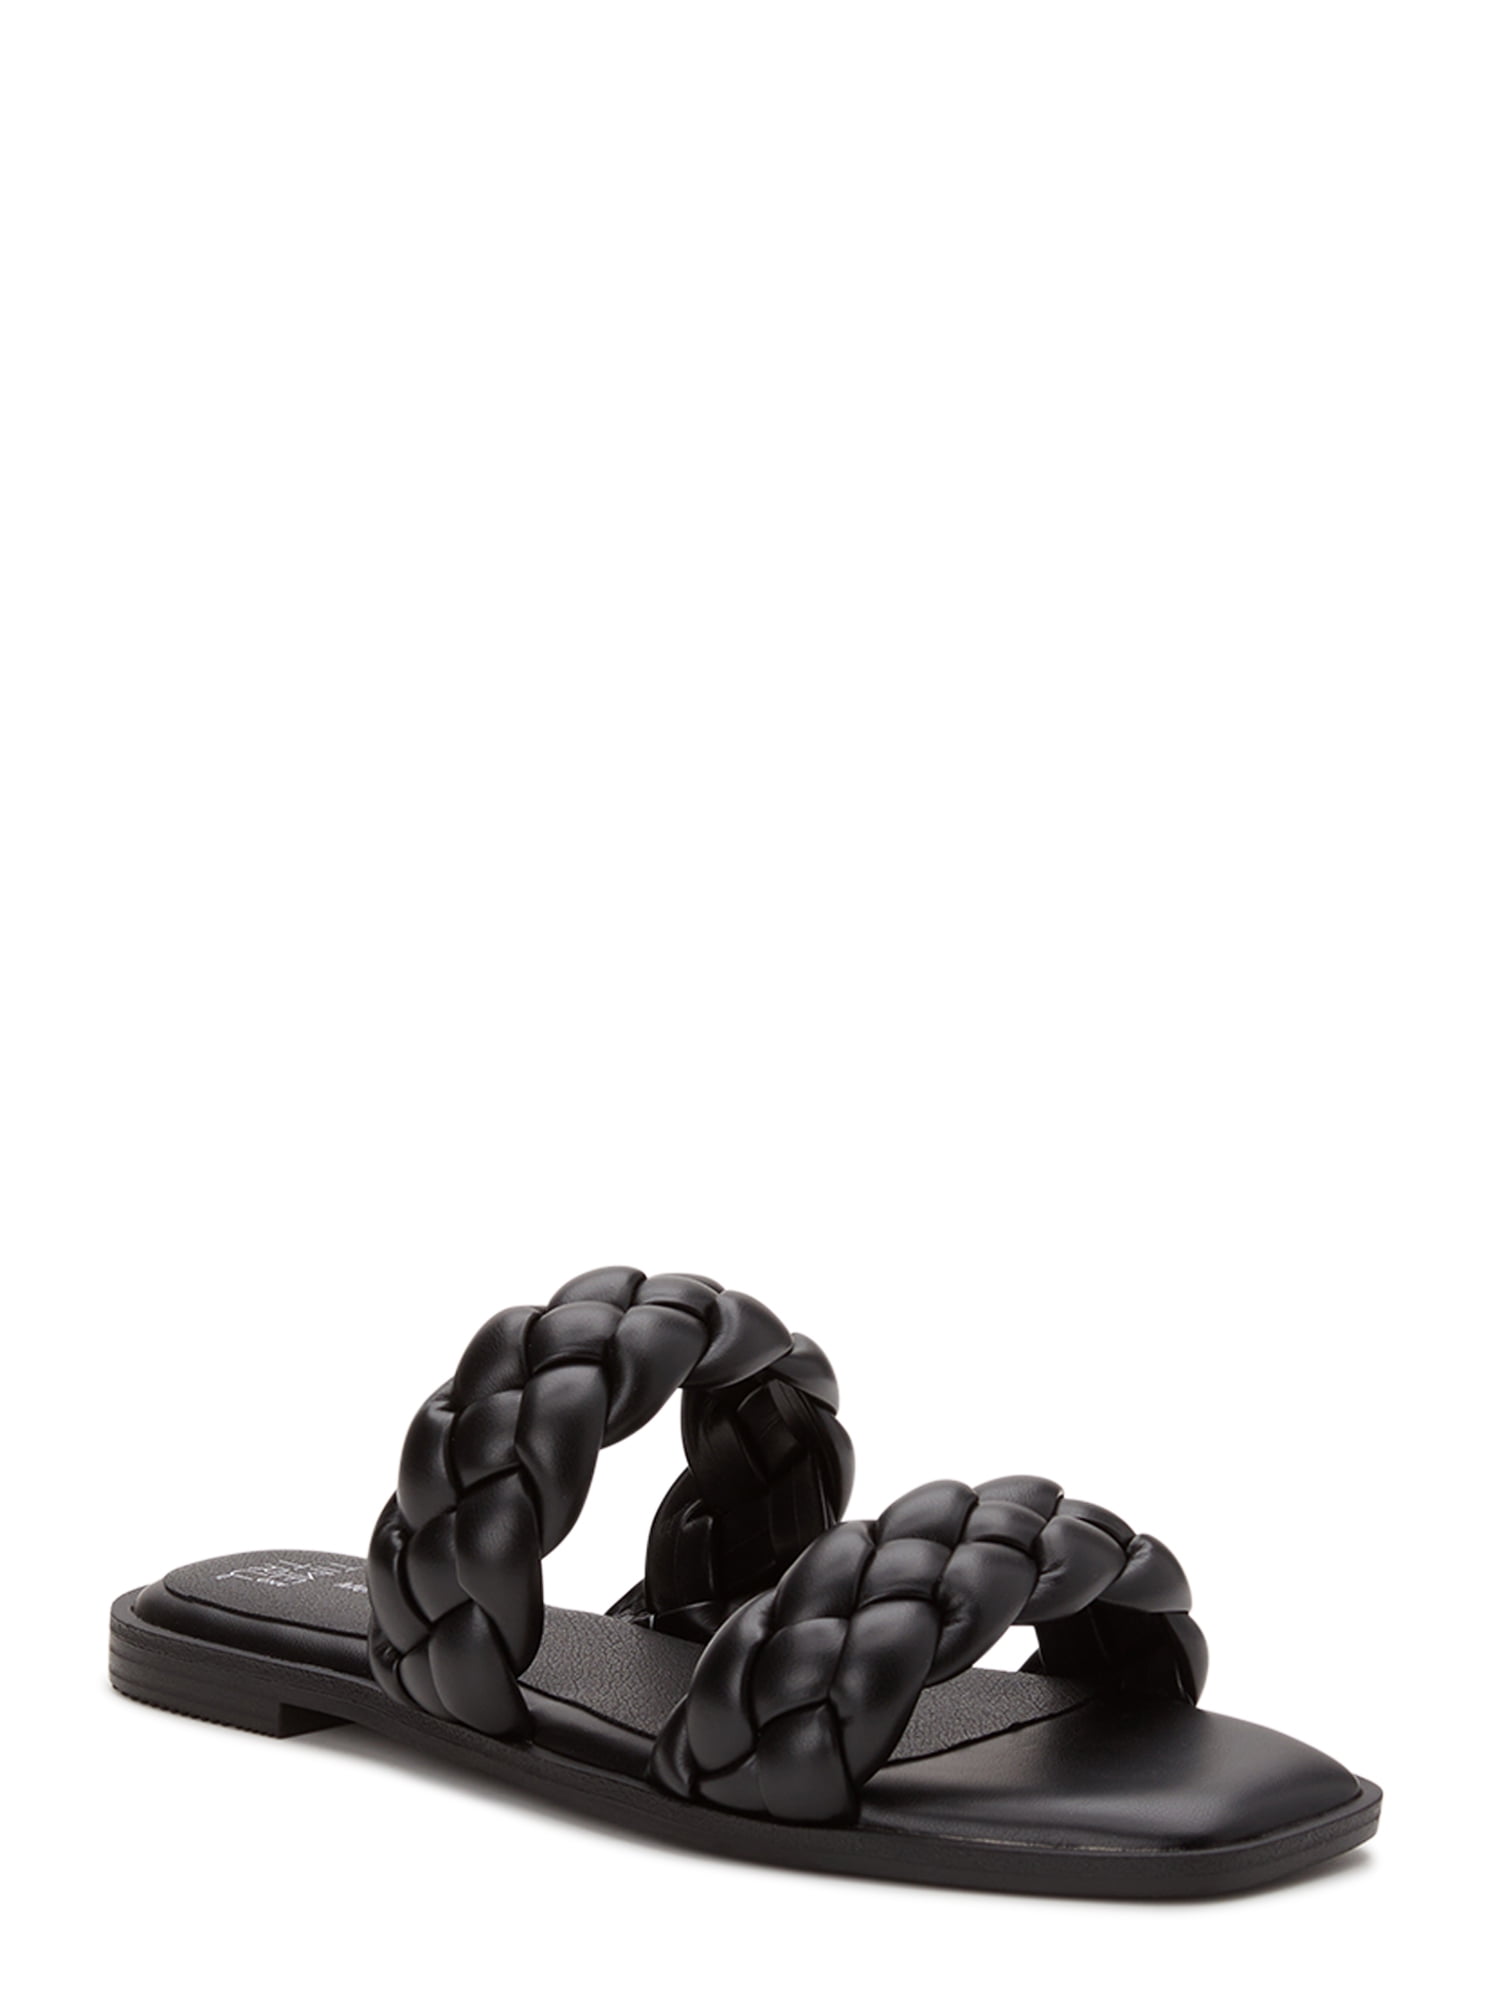 Time and Tru Women's Braided Two Band Sandals - Walmart.com